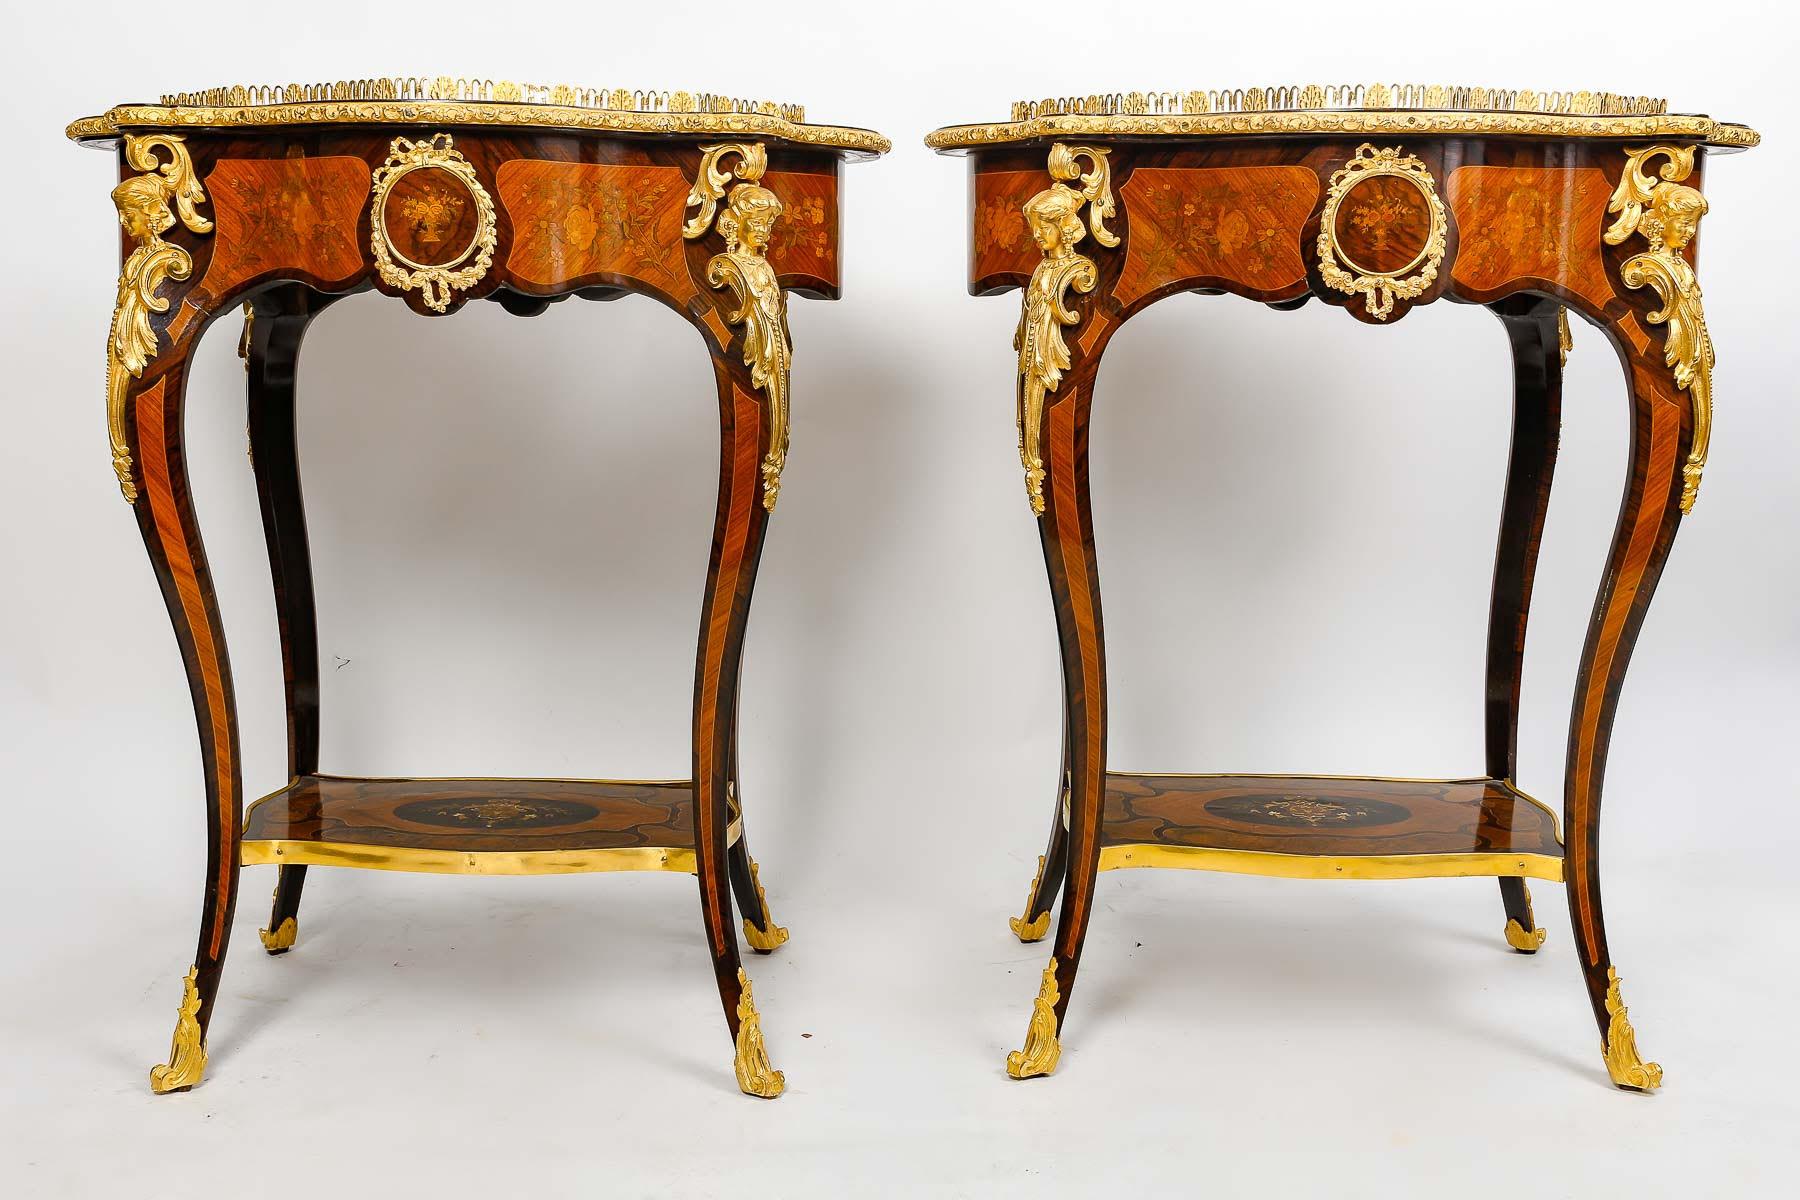 Pair of Precious Wood Marquetry and Gilt Bronze Planters, 19th Century. For Sale 2